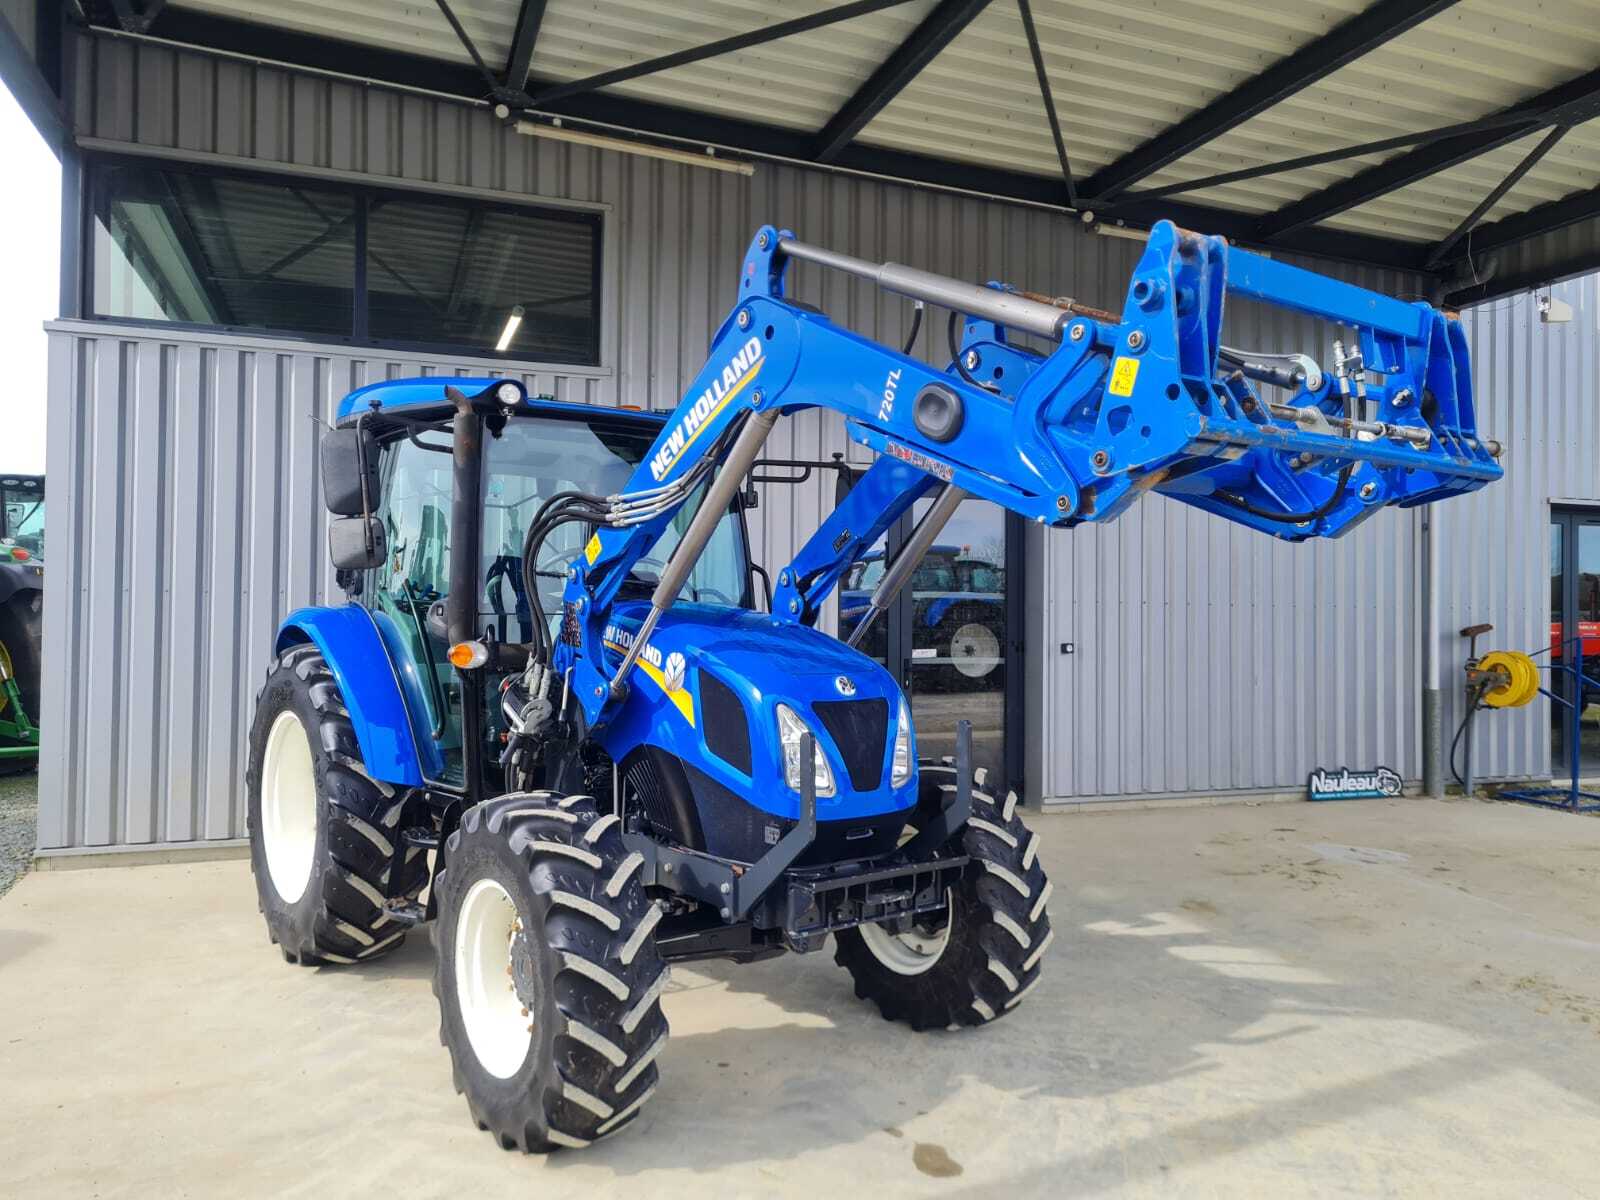 NEW HOLLAND T4.75S